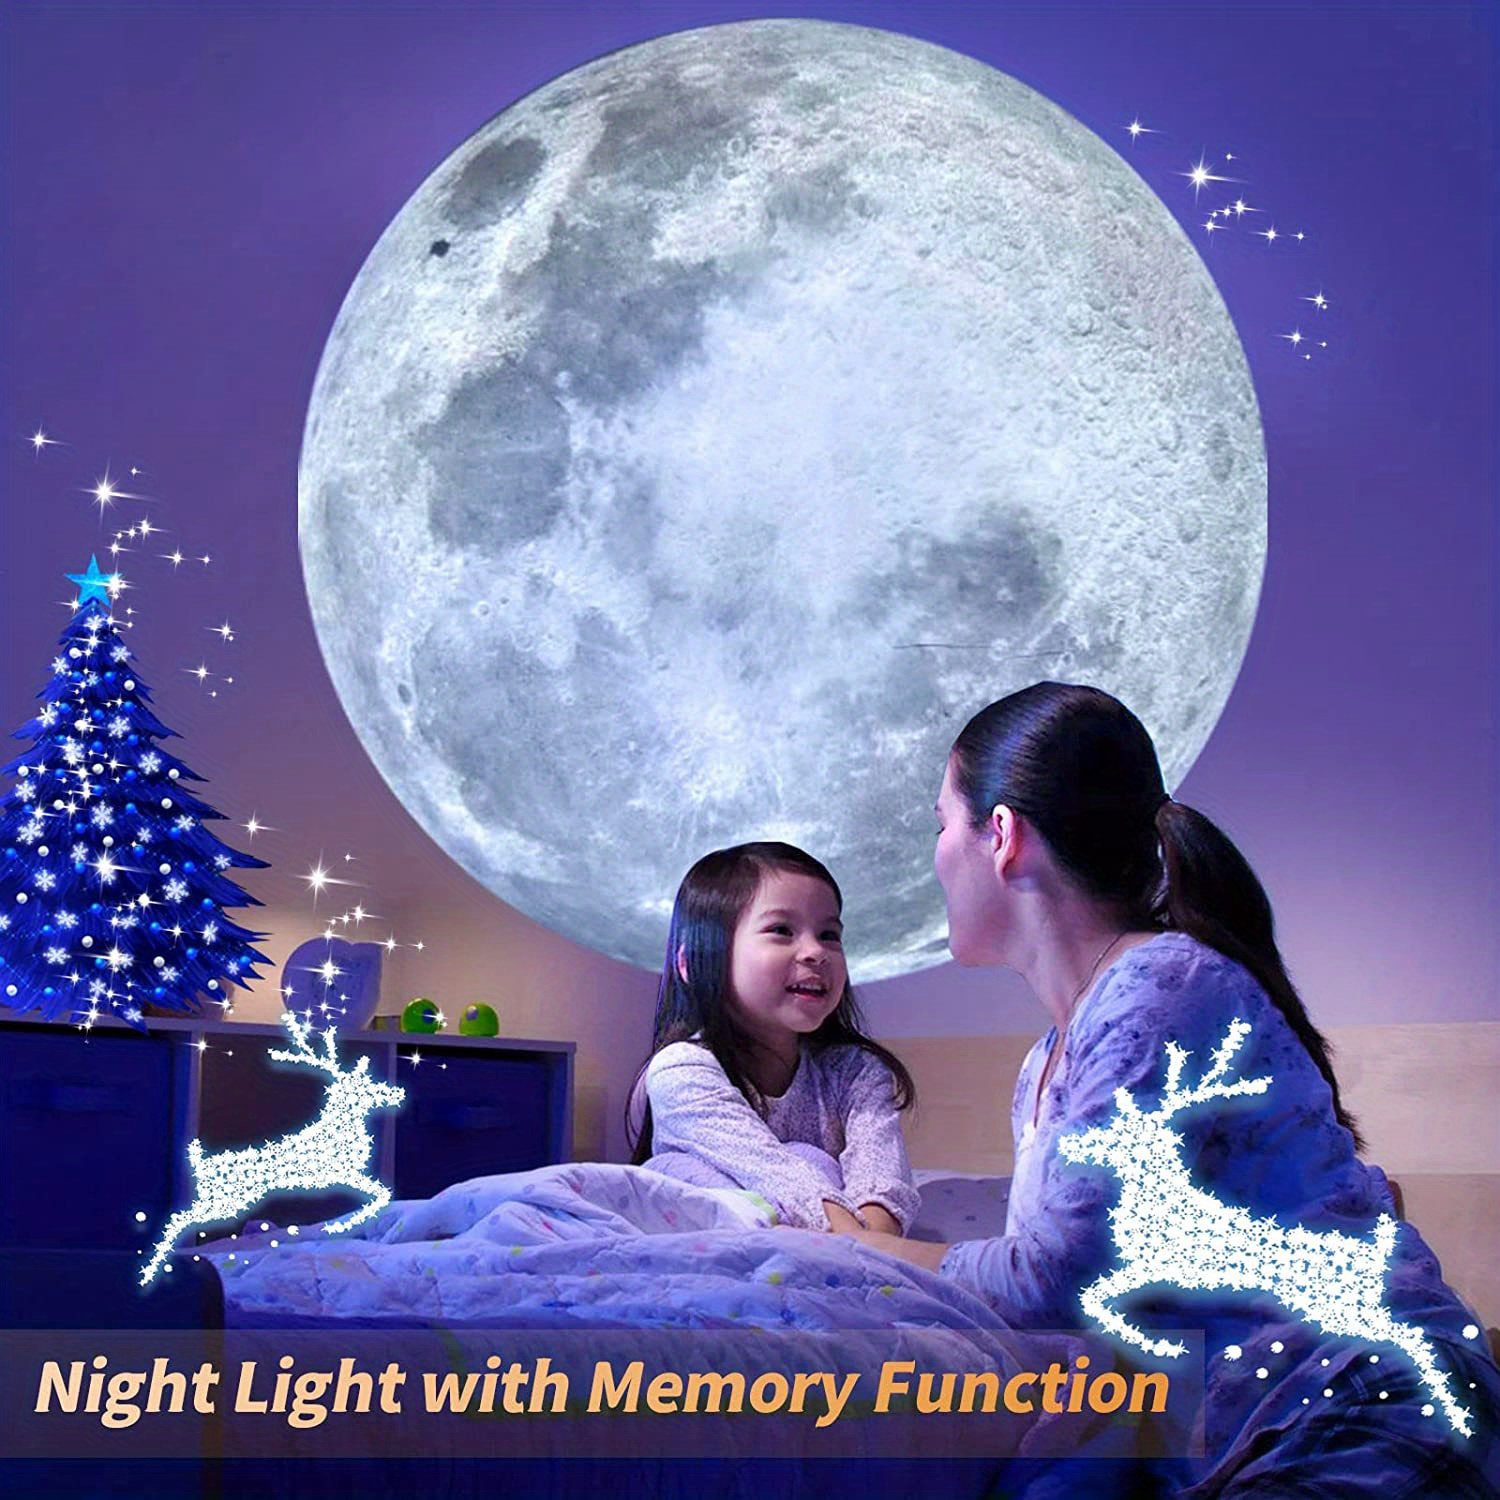  BODLYL Moon Lamp Projector Night Light,360 Degree Moon  Projection Light USB Powered Lighting,Romantic Moon Atmosphere Projector  for Moon Fantasy Lovers,Couples,Selfie,Bedroom Decor (3 Color Type) : Baby